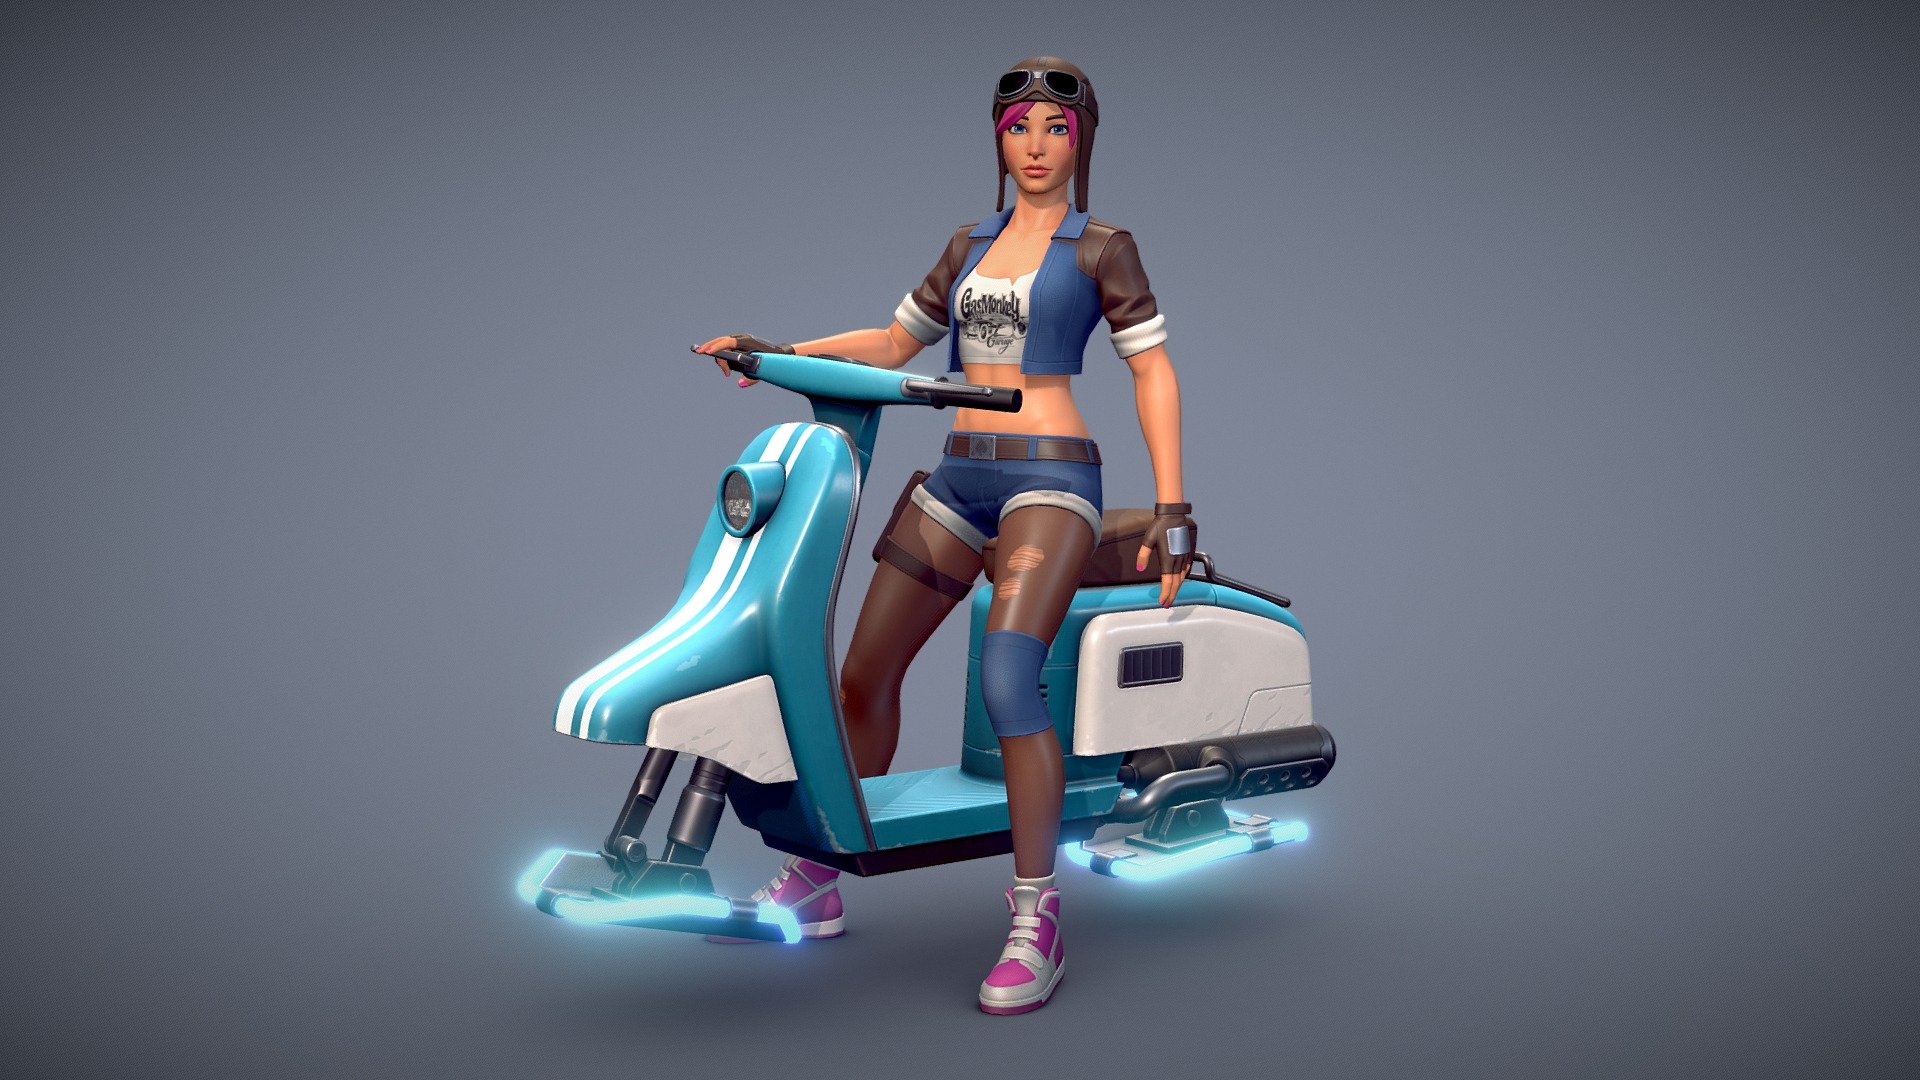 I had an idea of an anti-gravity vehicle that looks like classic scooter. I used Honda Julio for the base) - Racer - 3D model by artrobot 3d model